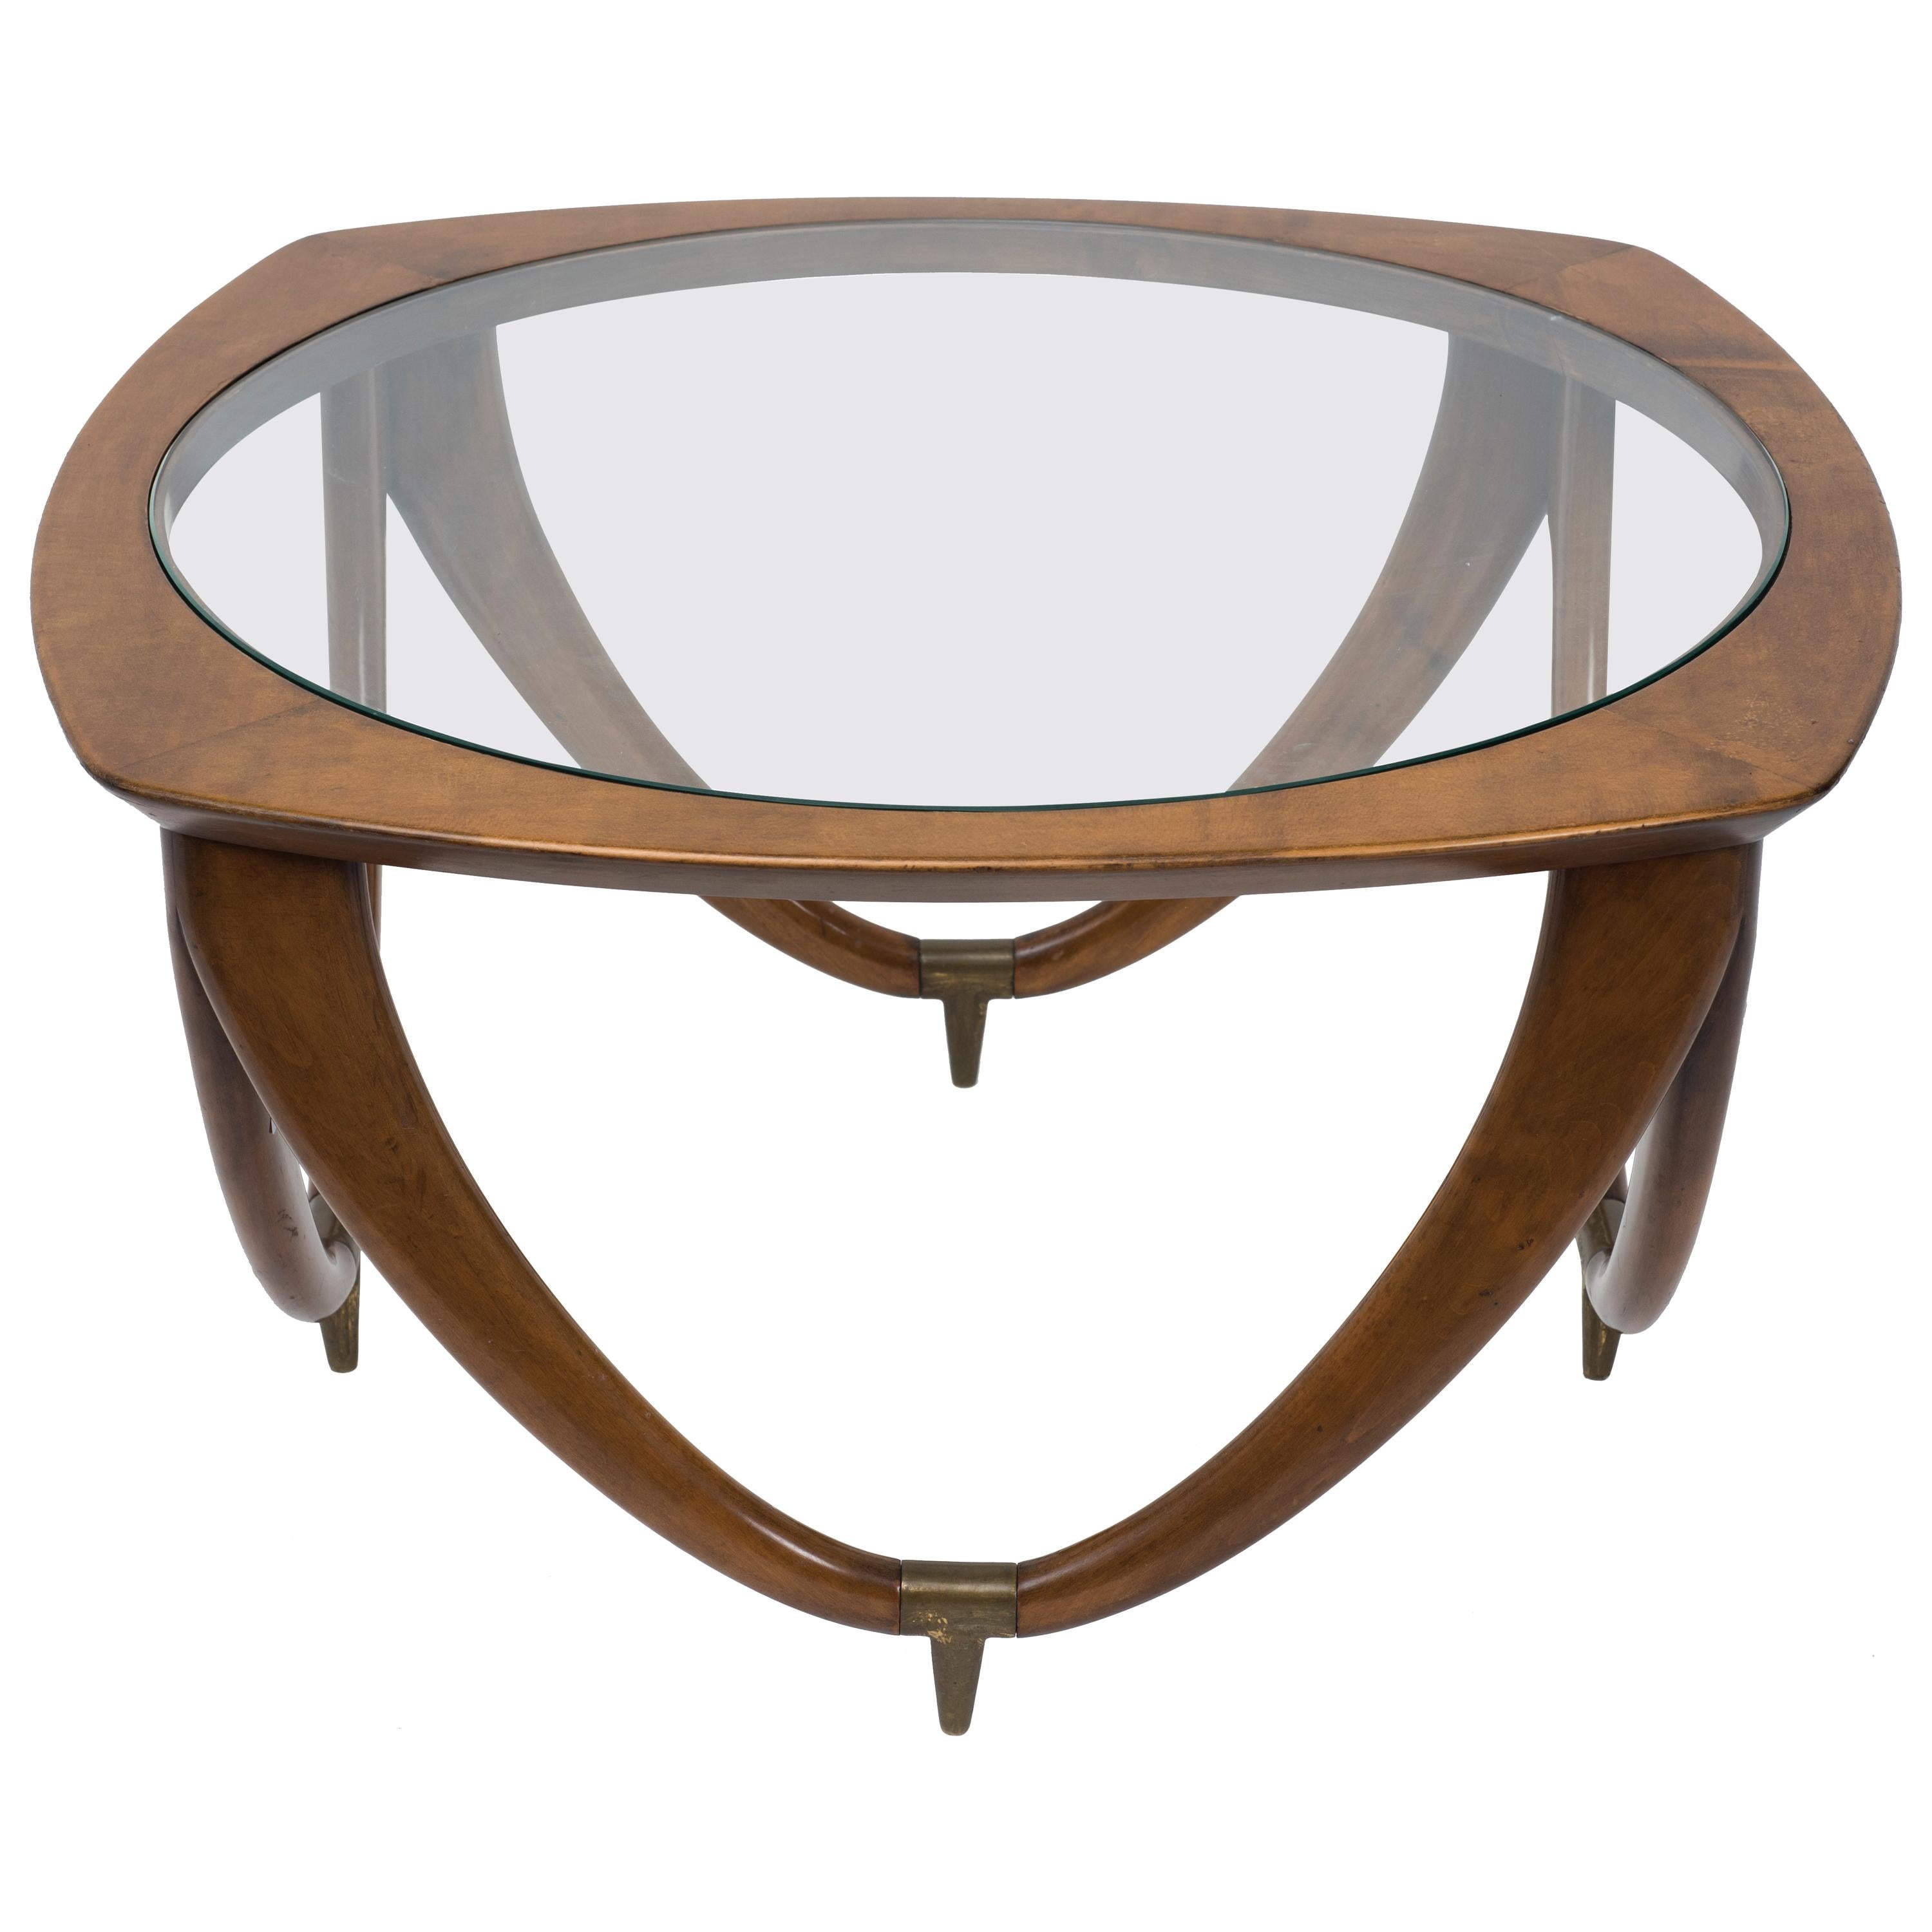 Vintage Coffee Table by Melchiorre Bega, Italian Production, circa 1950